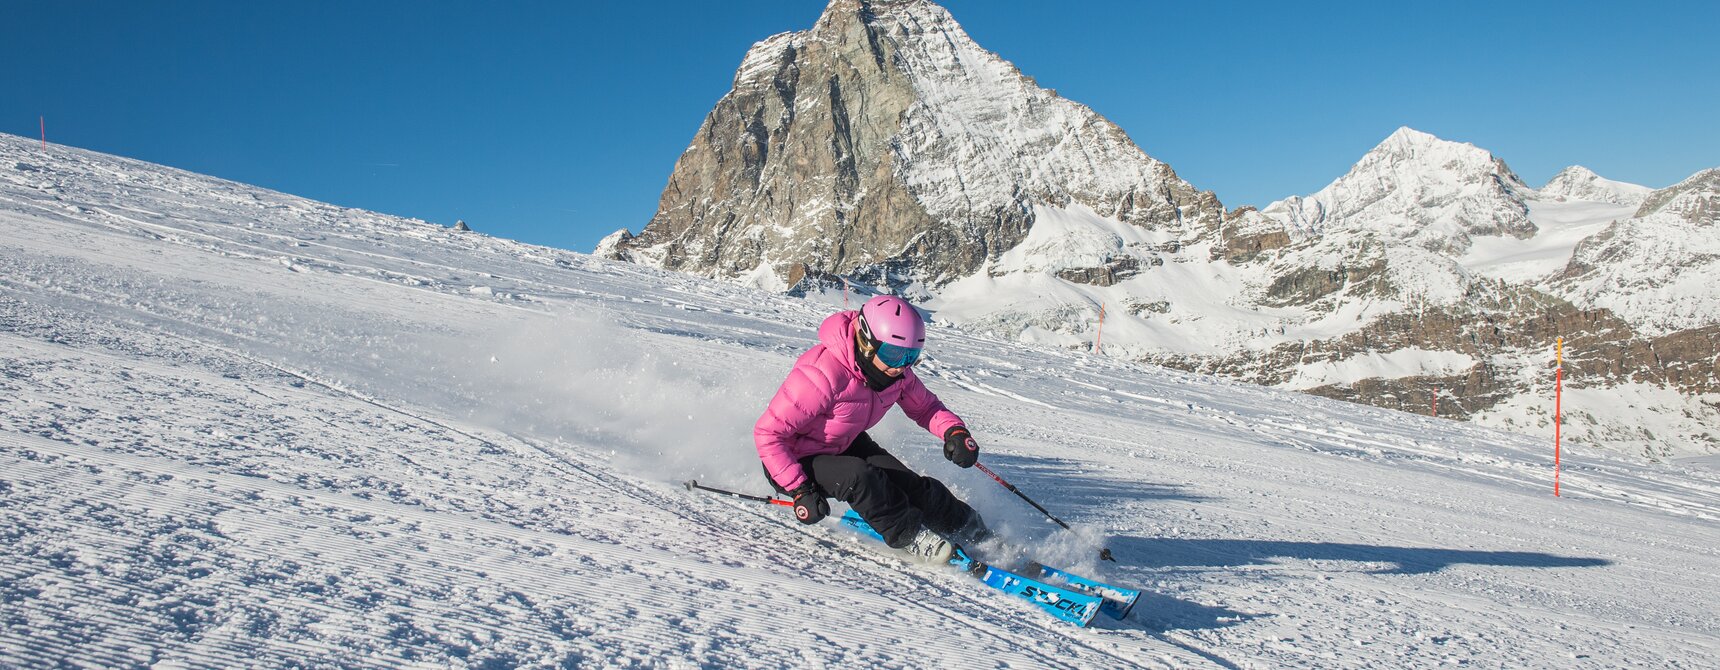 A woman skis and in the background is the Matterhorn | © Michael Portmann